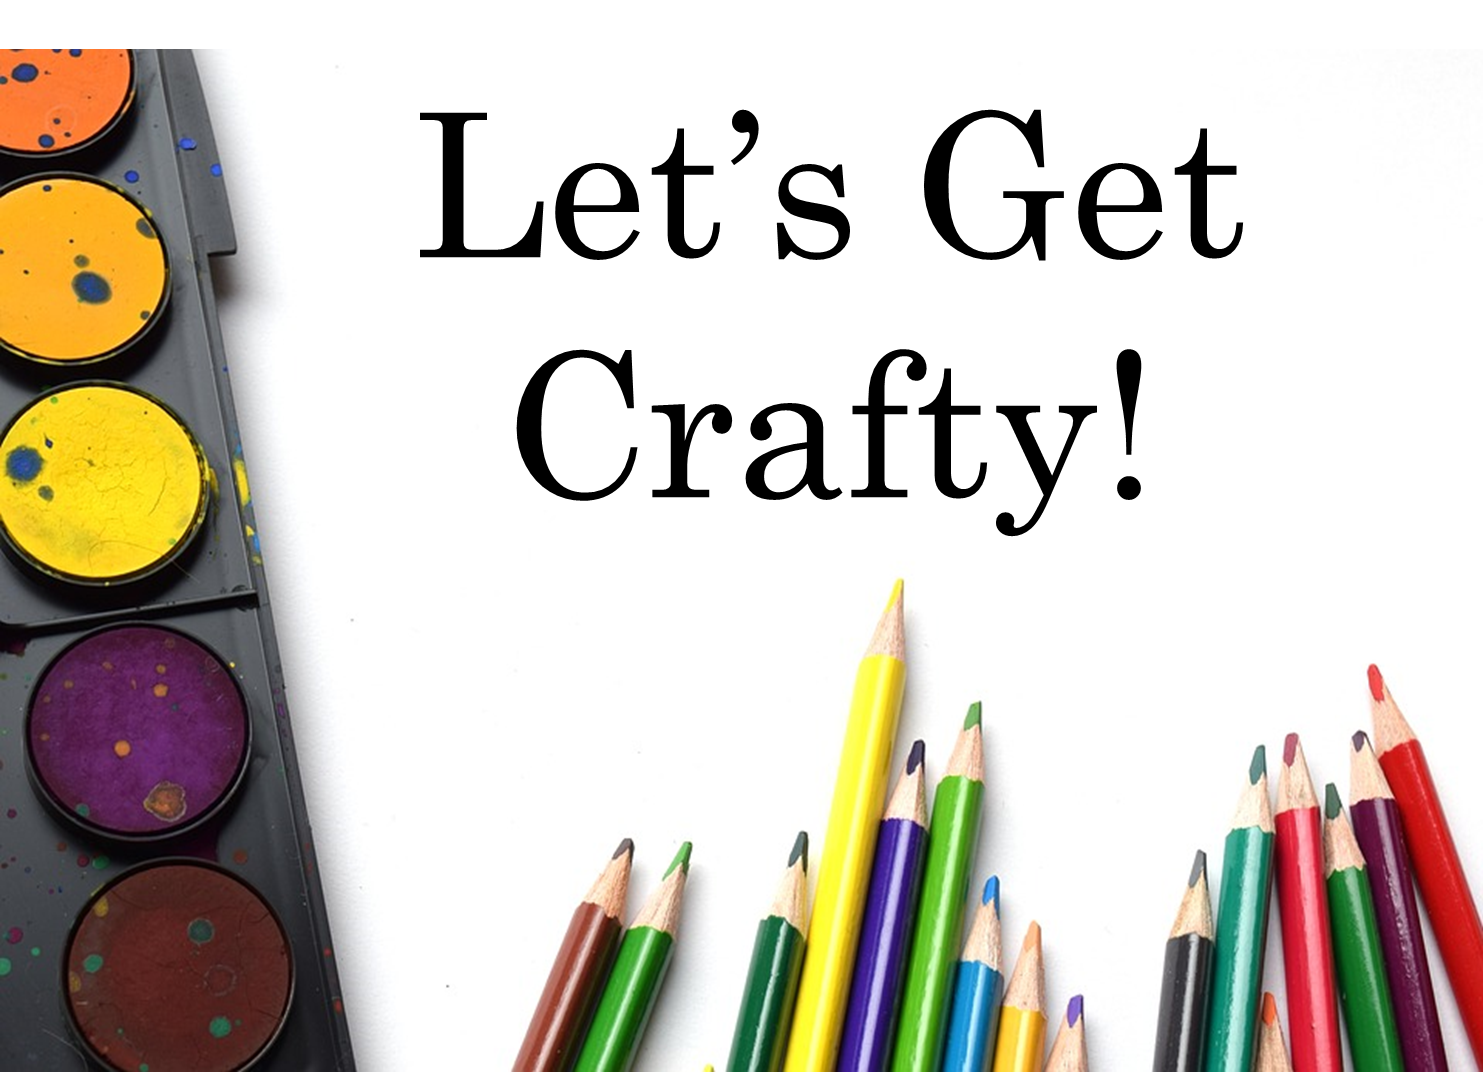 Let's Get Crafty image with watercolor paints and colored pencils.